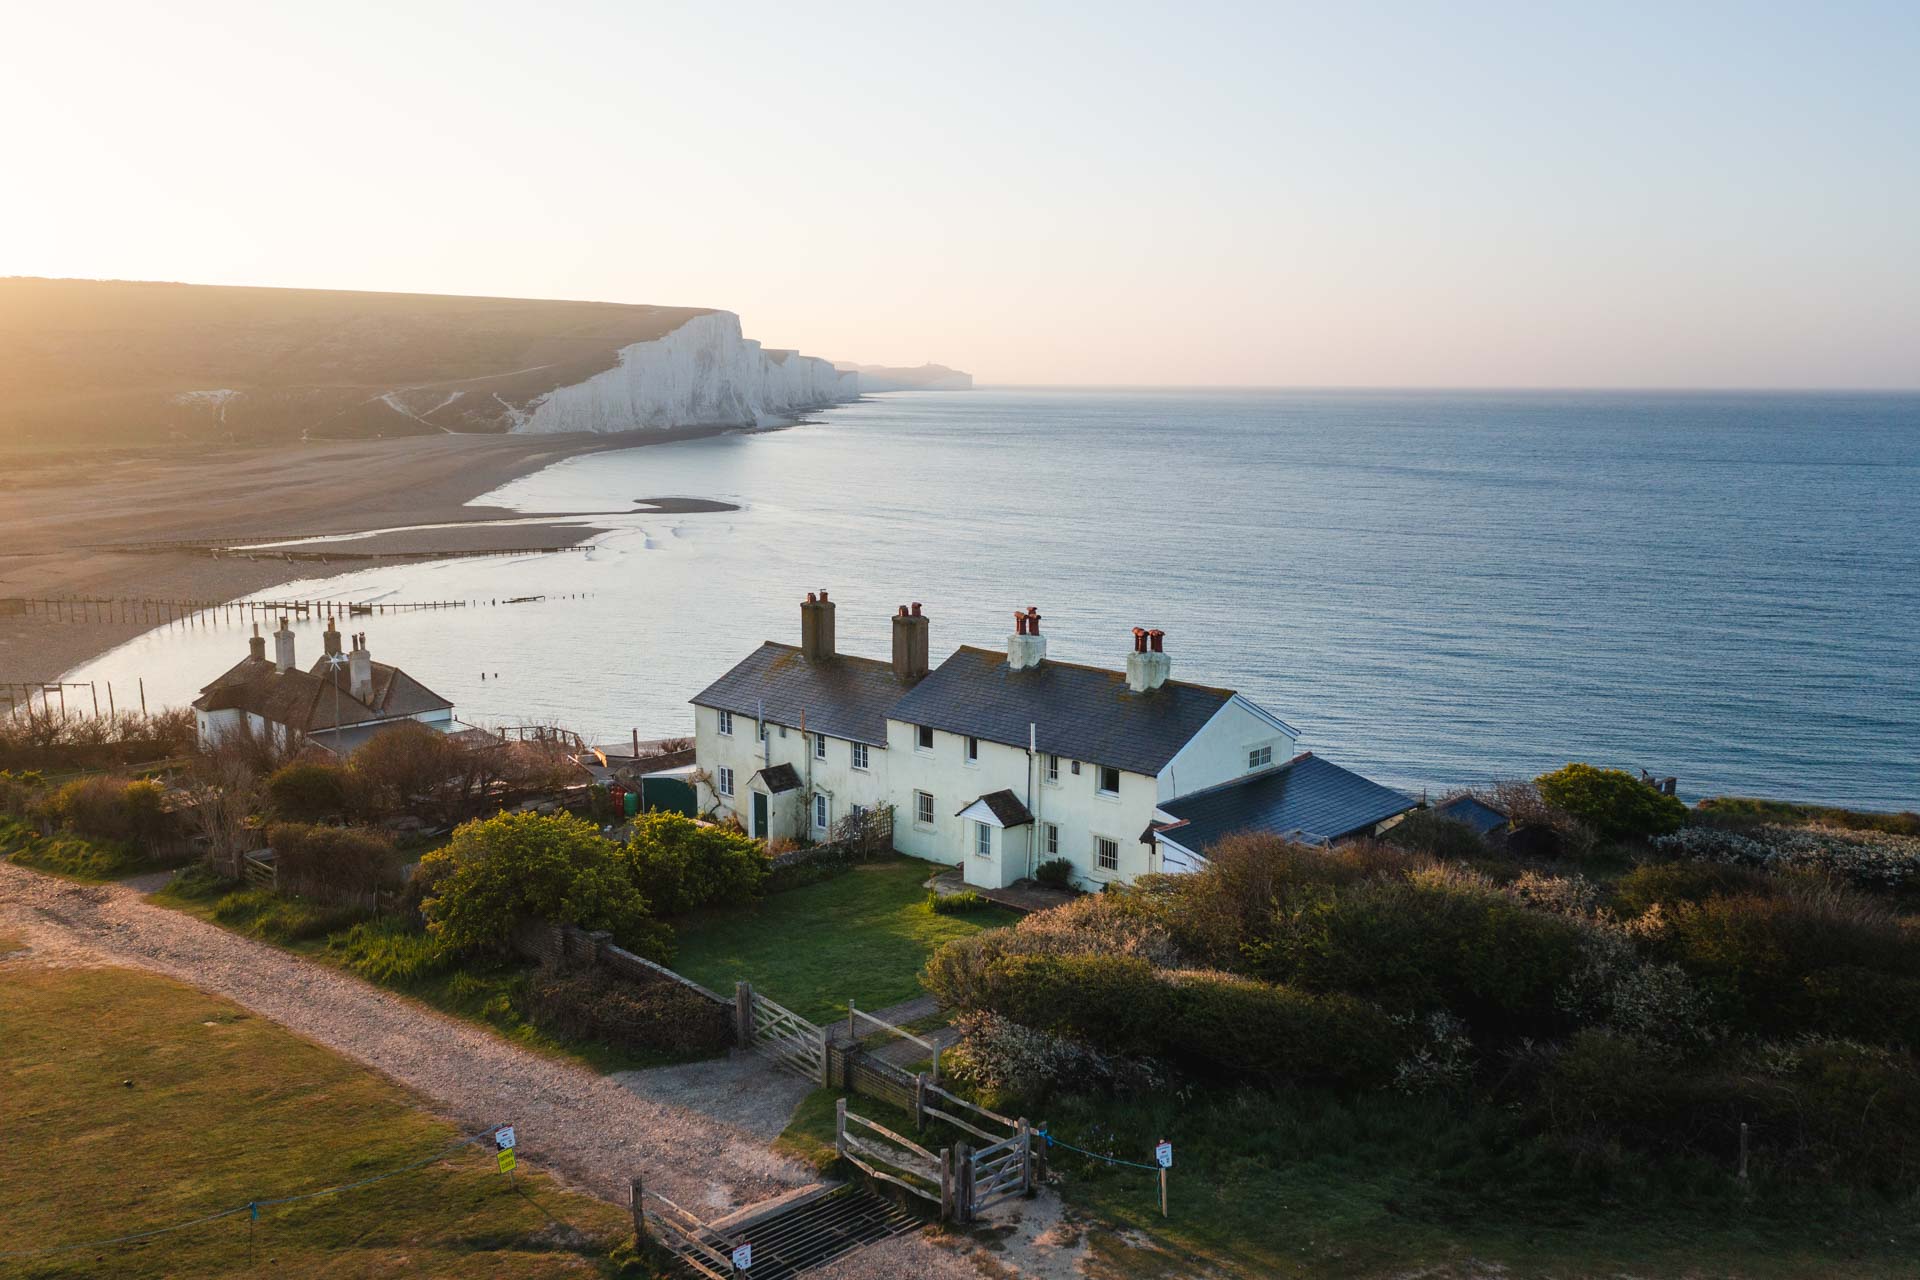 Sunrise light glowing over the lifeguard houses at Cuckmere Haven with the Seven Sisters Cliffs in the background.